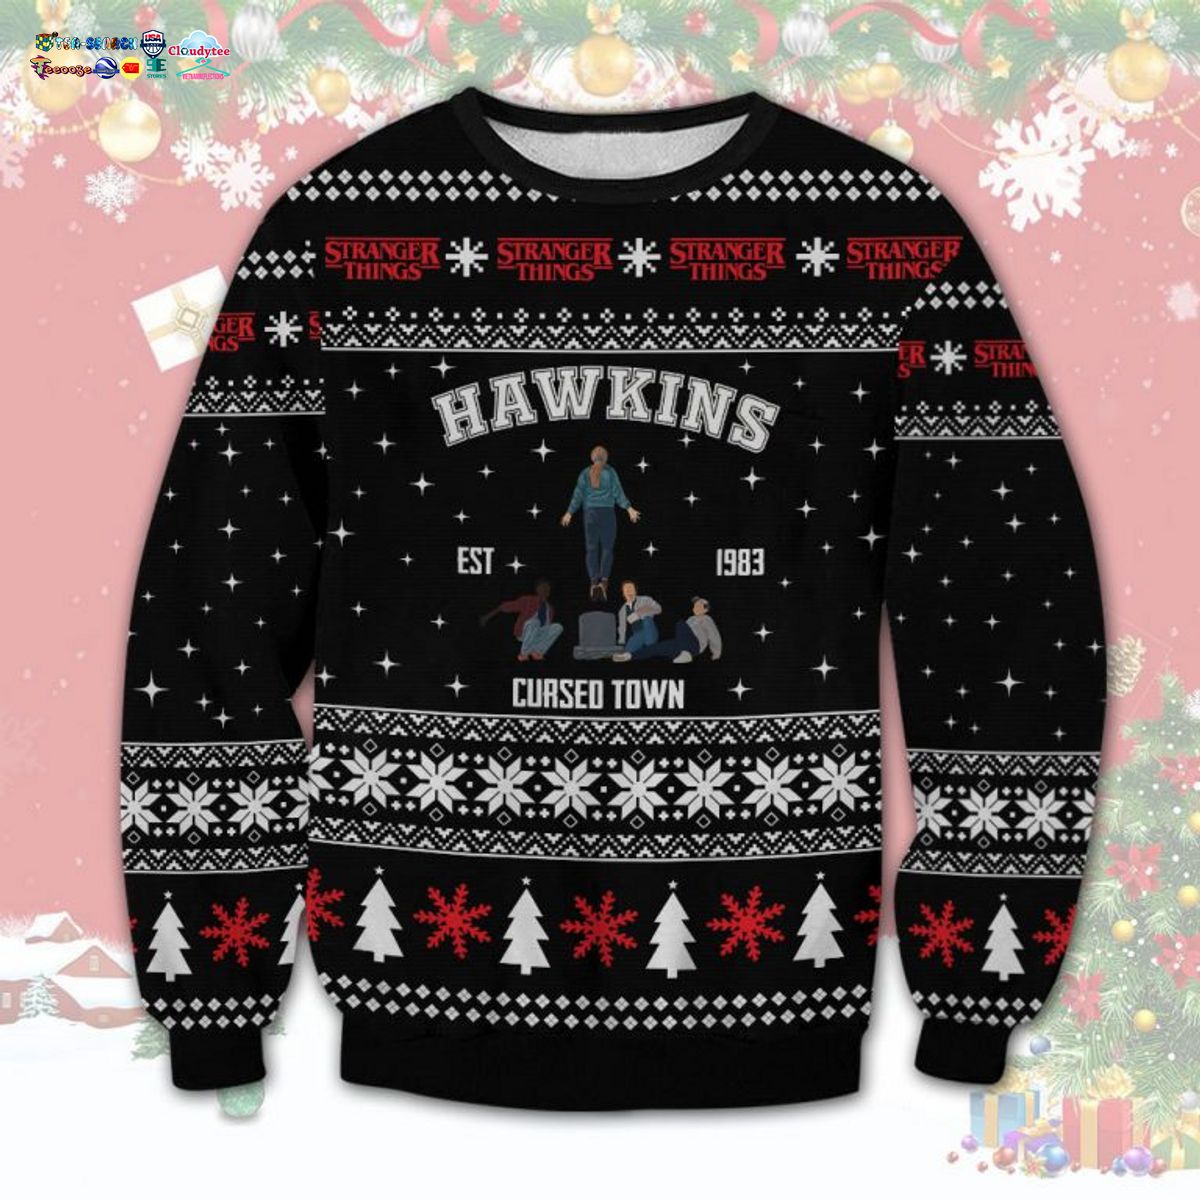 Stranger Things Hawkins Cursed Town Ugly Christmas Sweater - Beauty queen